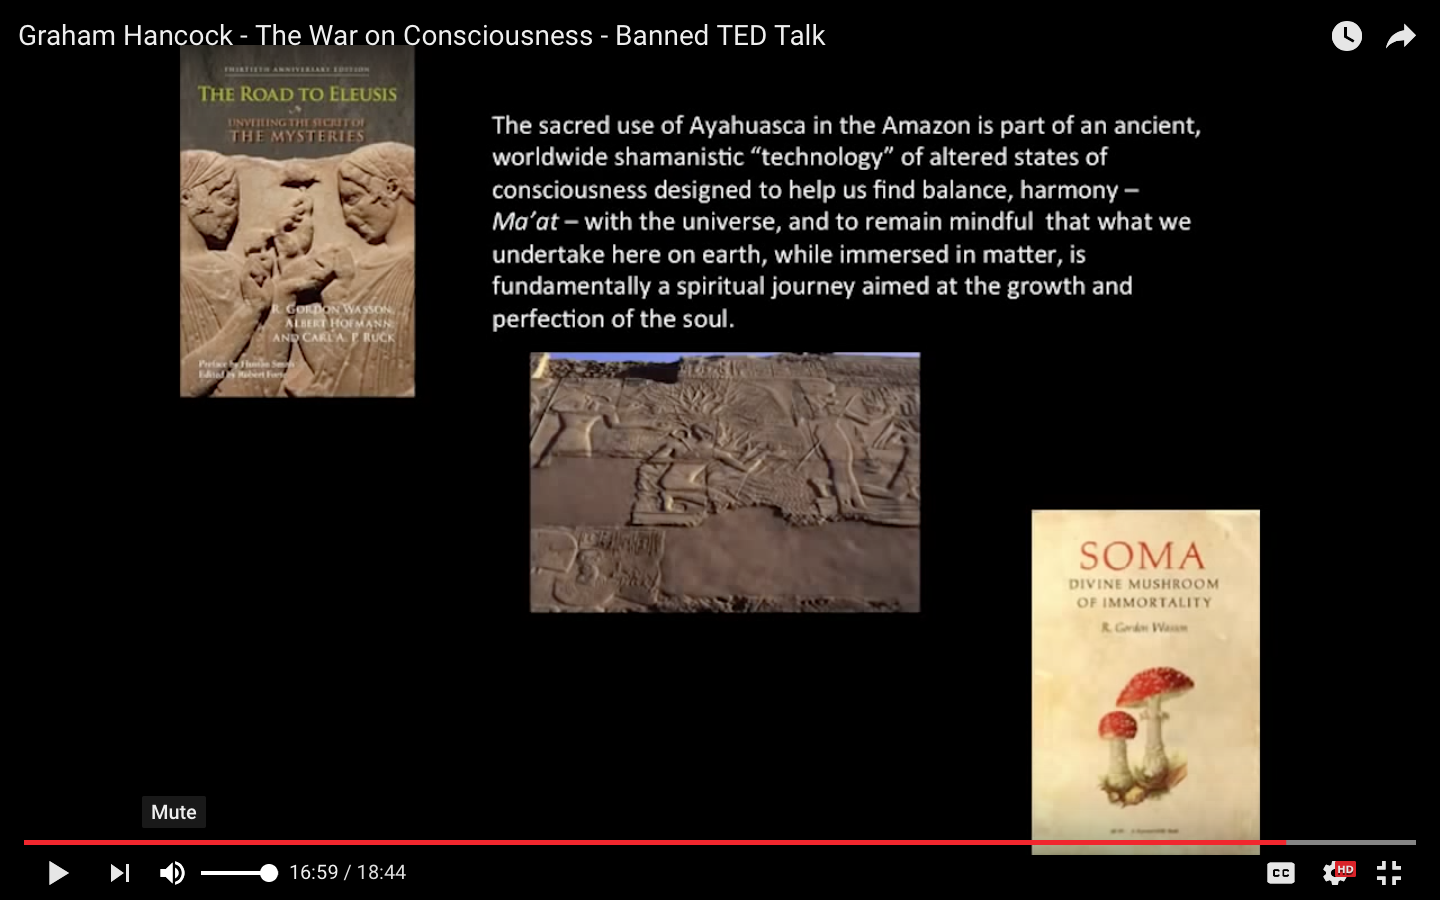 Graham Hancock, The War on Consciousness, ancient traditions, psychoactives, Soma of the Vedas